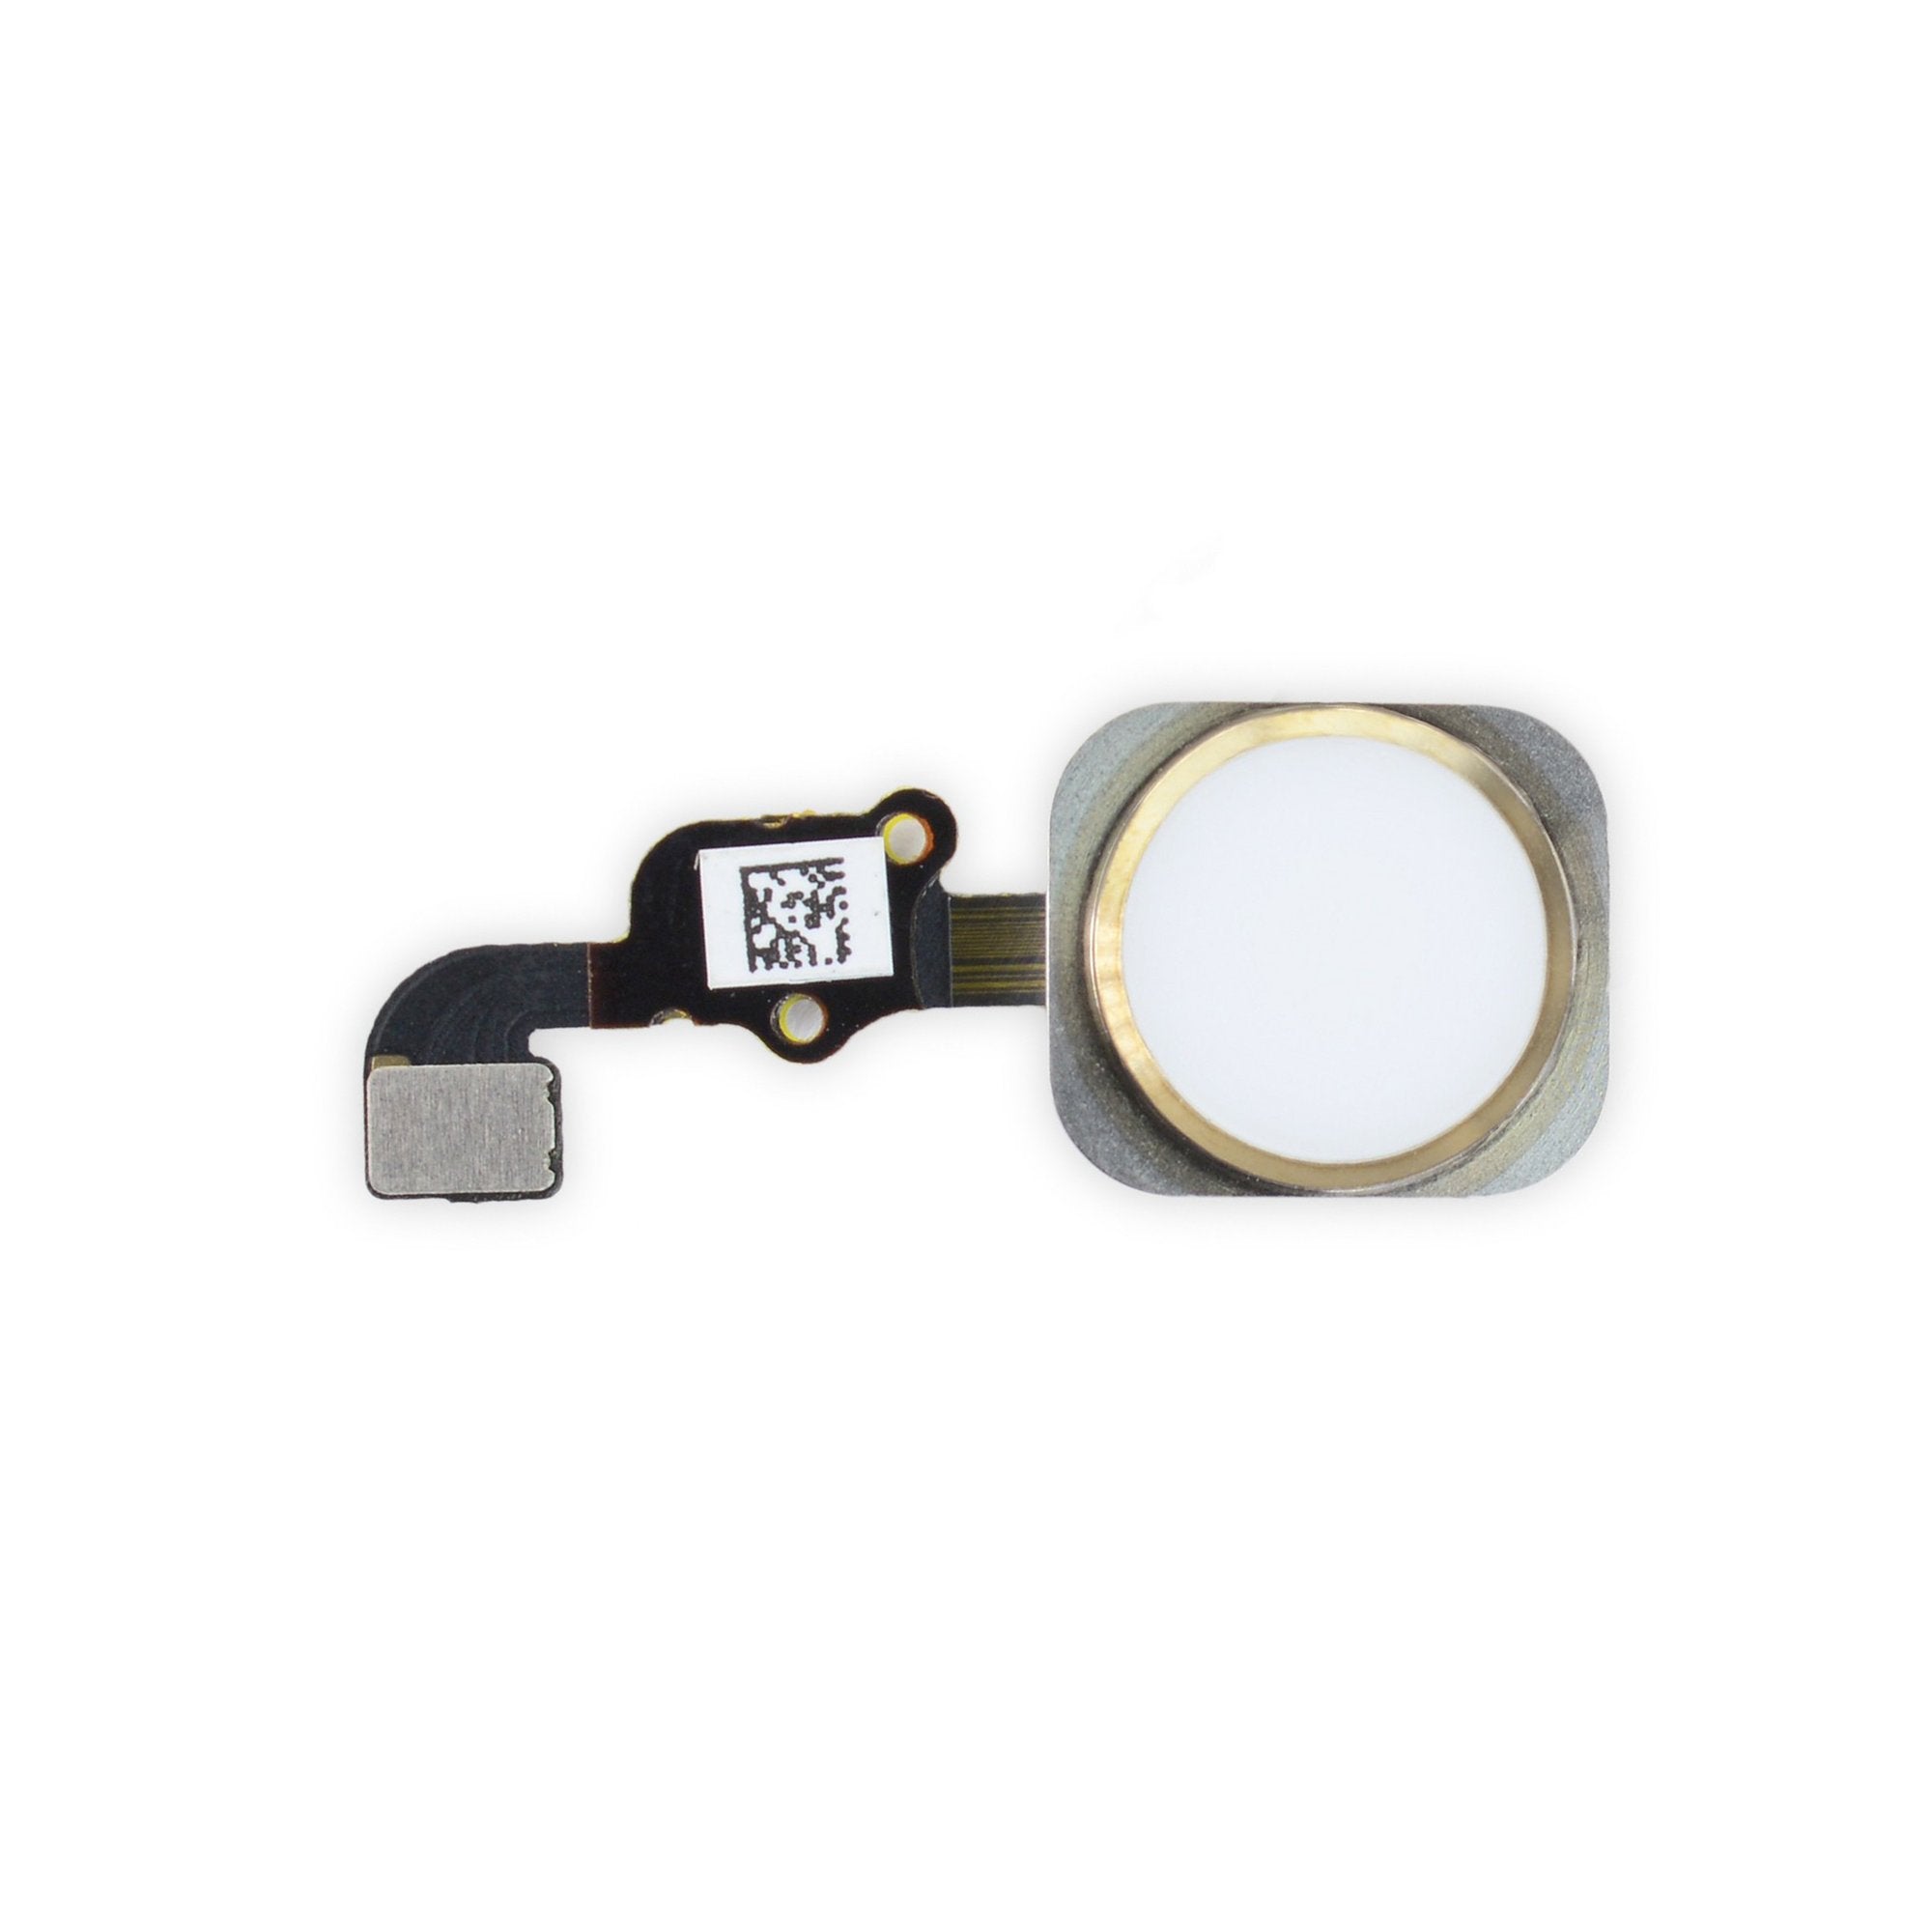 iPhone 6s Plus Home Button Assembly Gold New Part Only